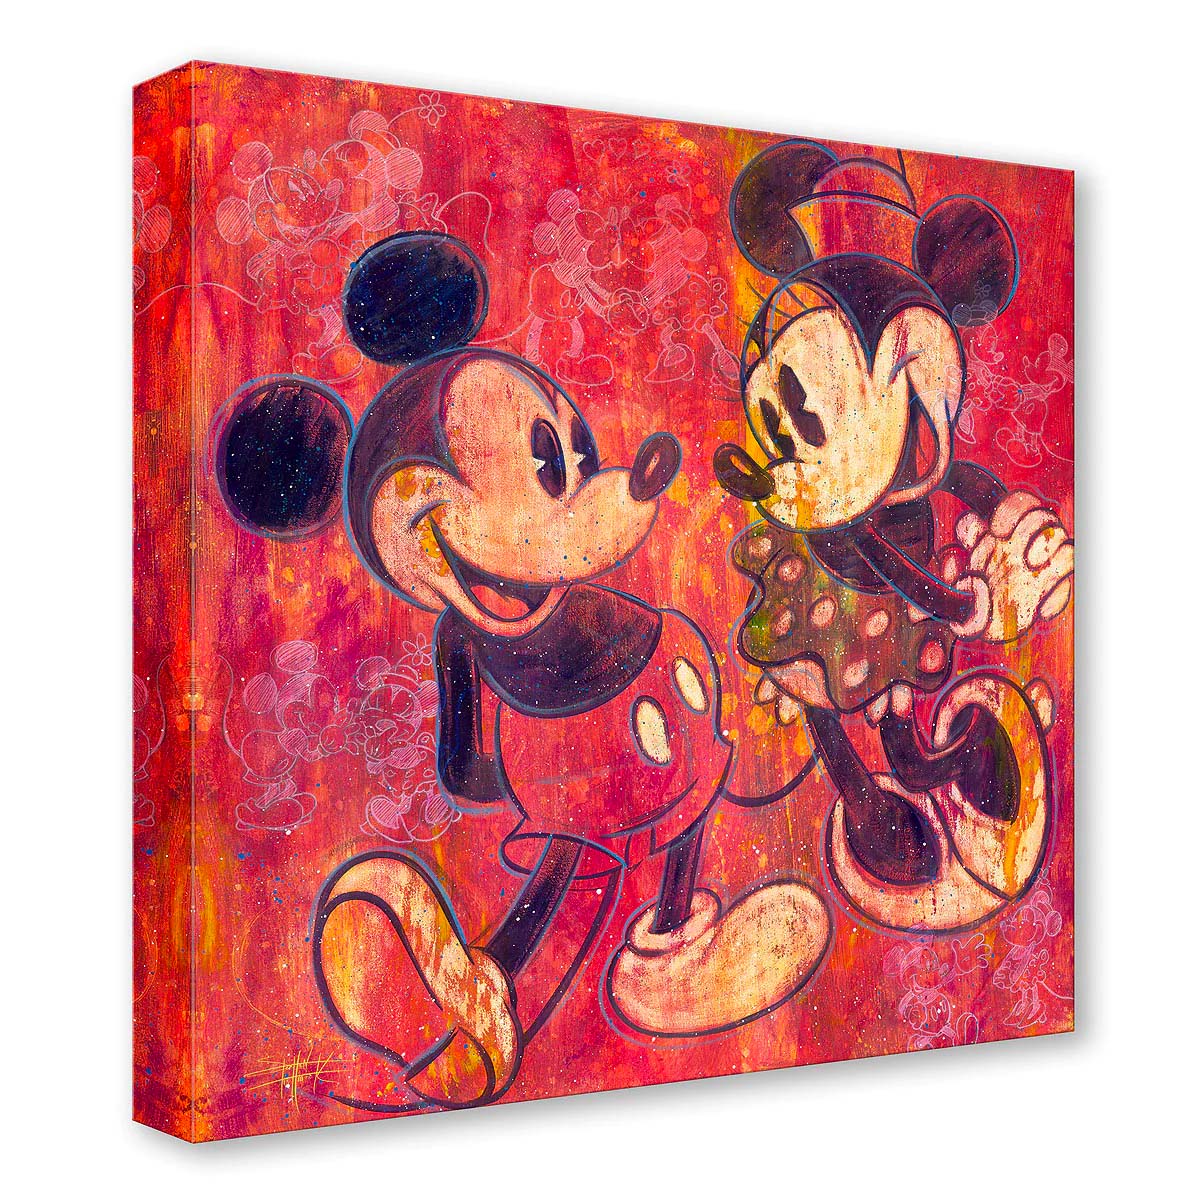 Stephen Fishwick Disney "Drawn Together" Limited Edition Canvas Giclee